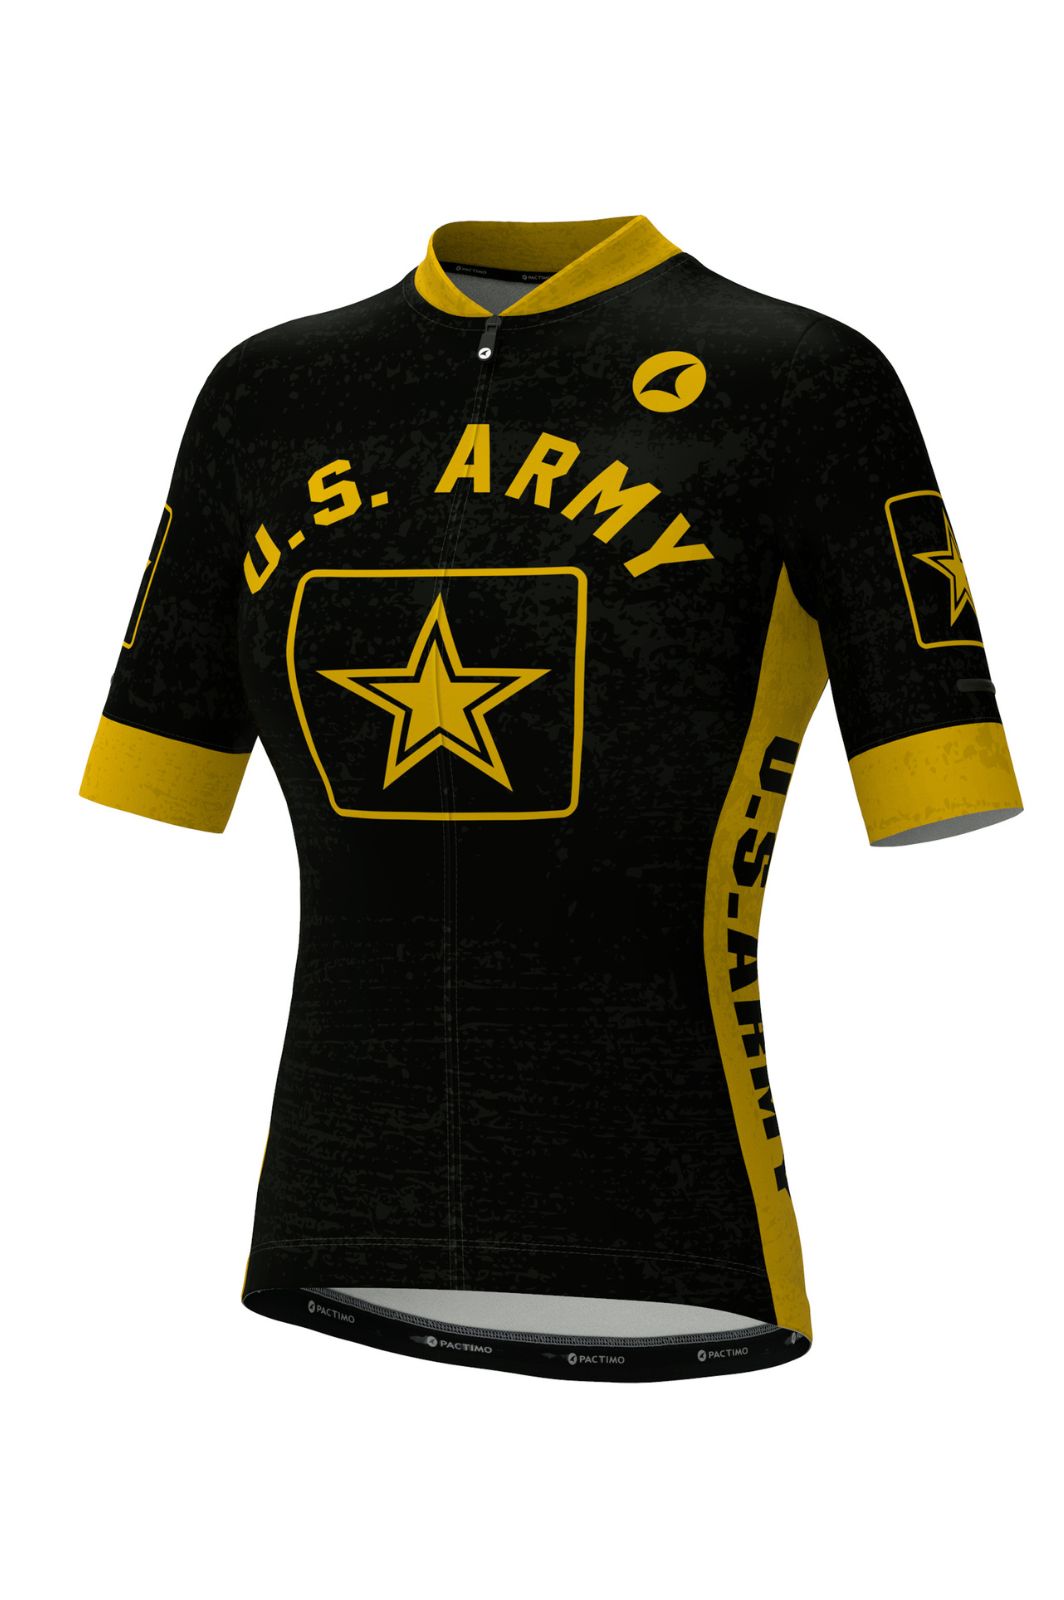 Women's US Army Cycling Jersey - Ascent Aero Front View